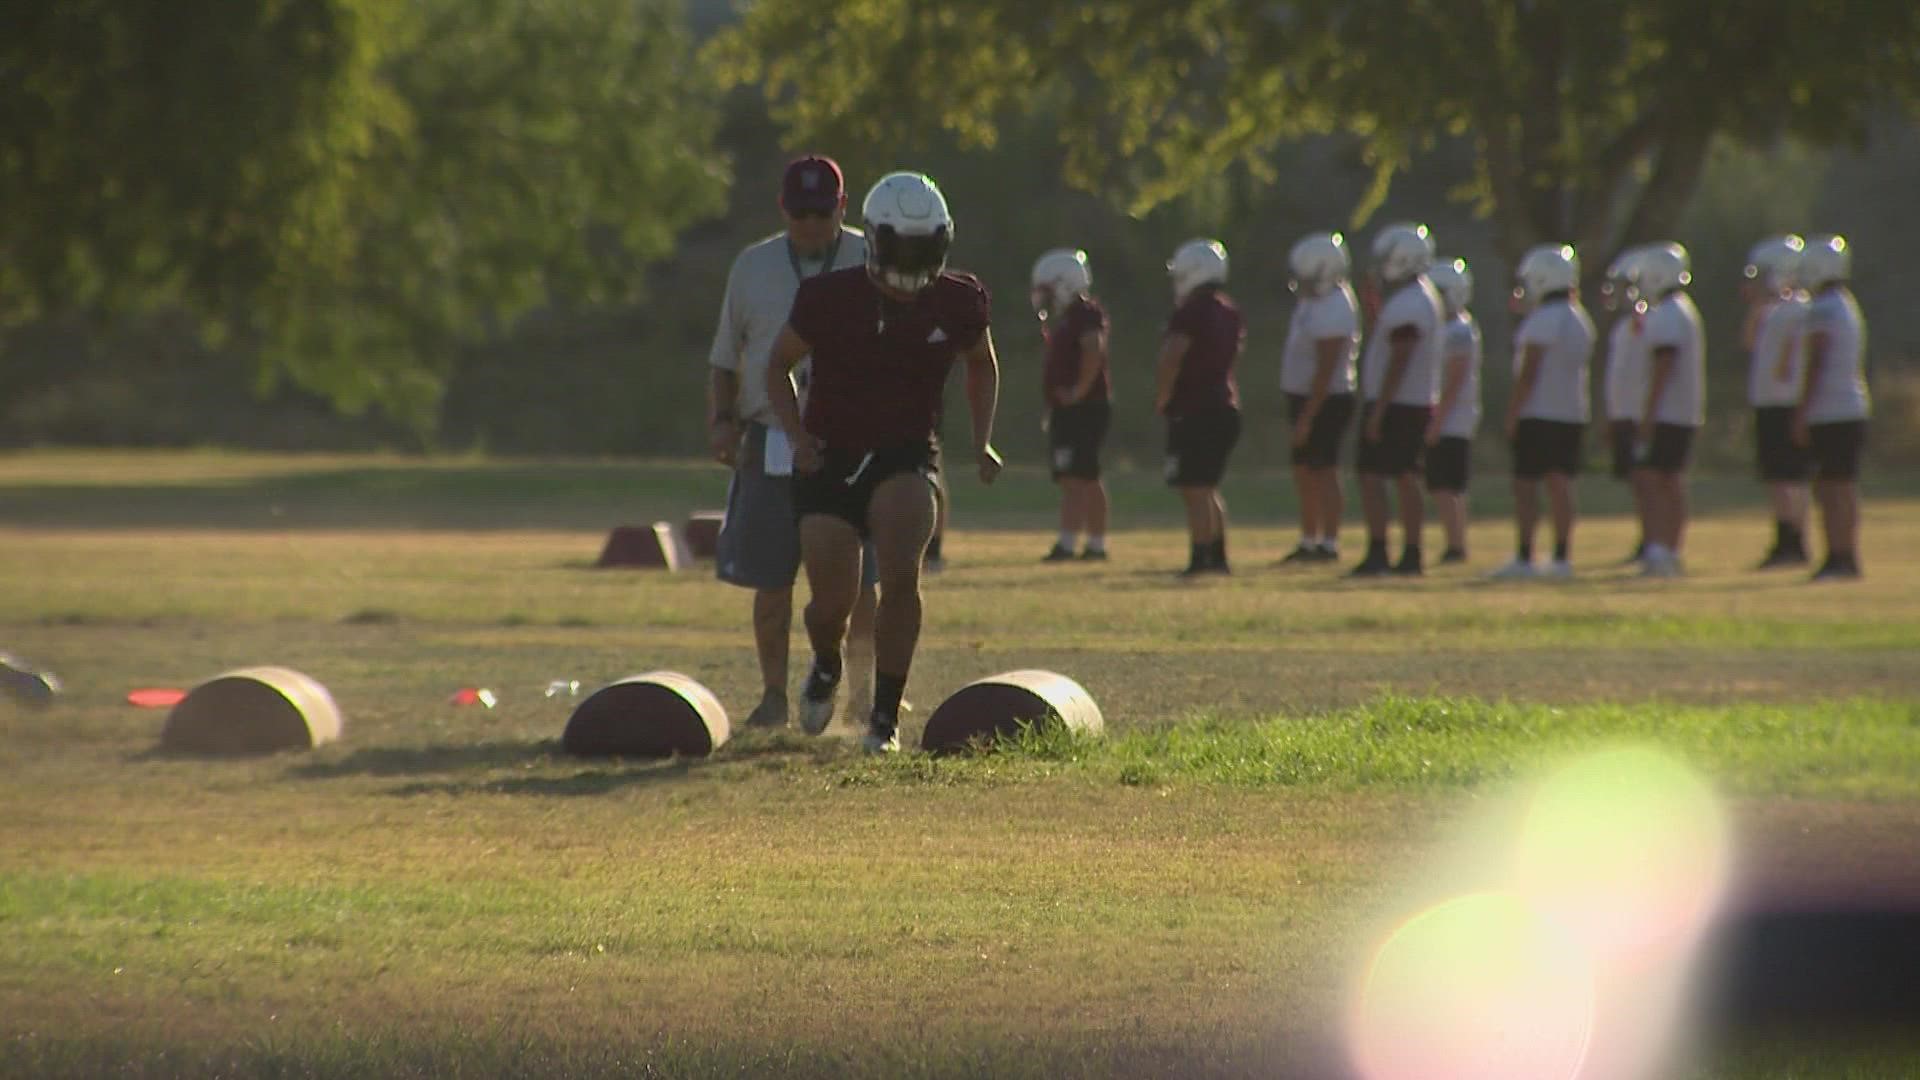 KENS 5 spoke to the head coach ahead of the new season following the tragedy that took place in the town in May.